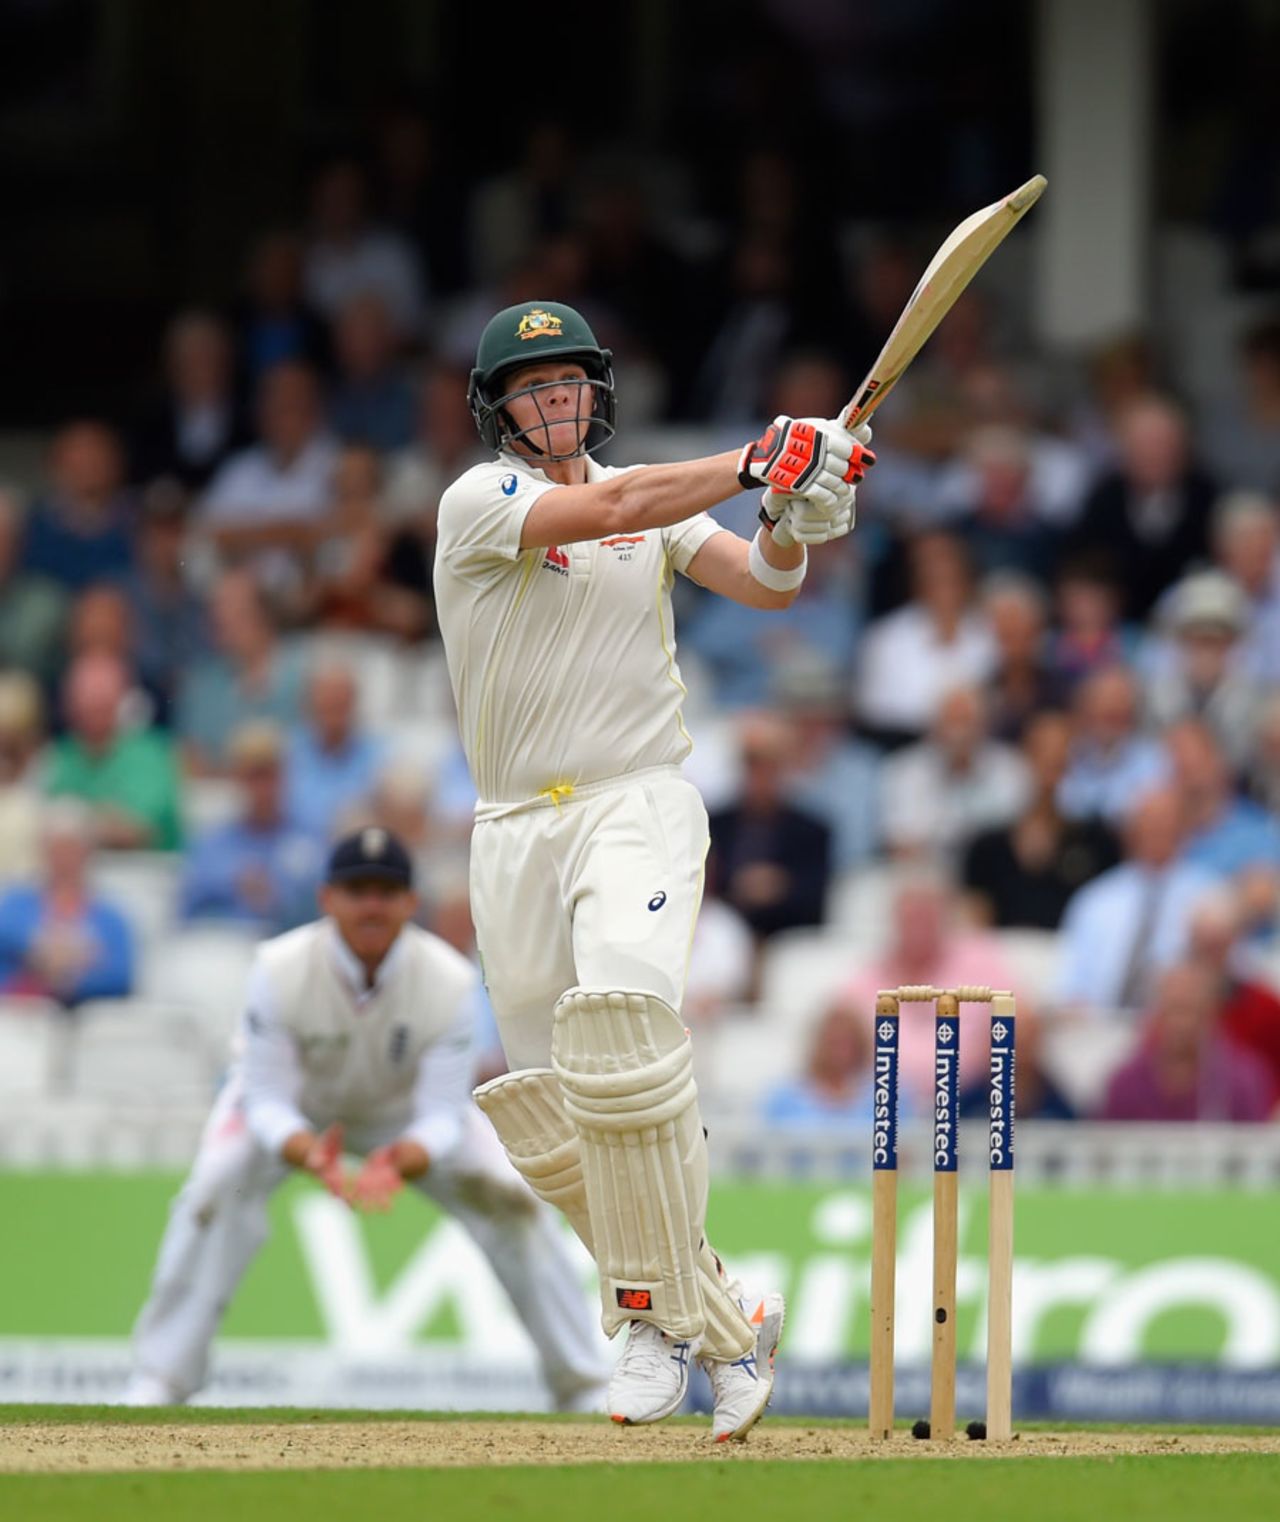 Steven Smith progressed beyond a half-century, England v Australia, 5th Investec Ashes Test, The Oval, August 20, 2015